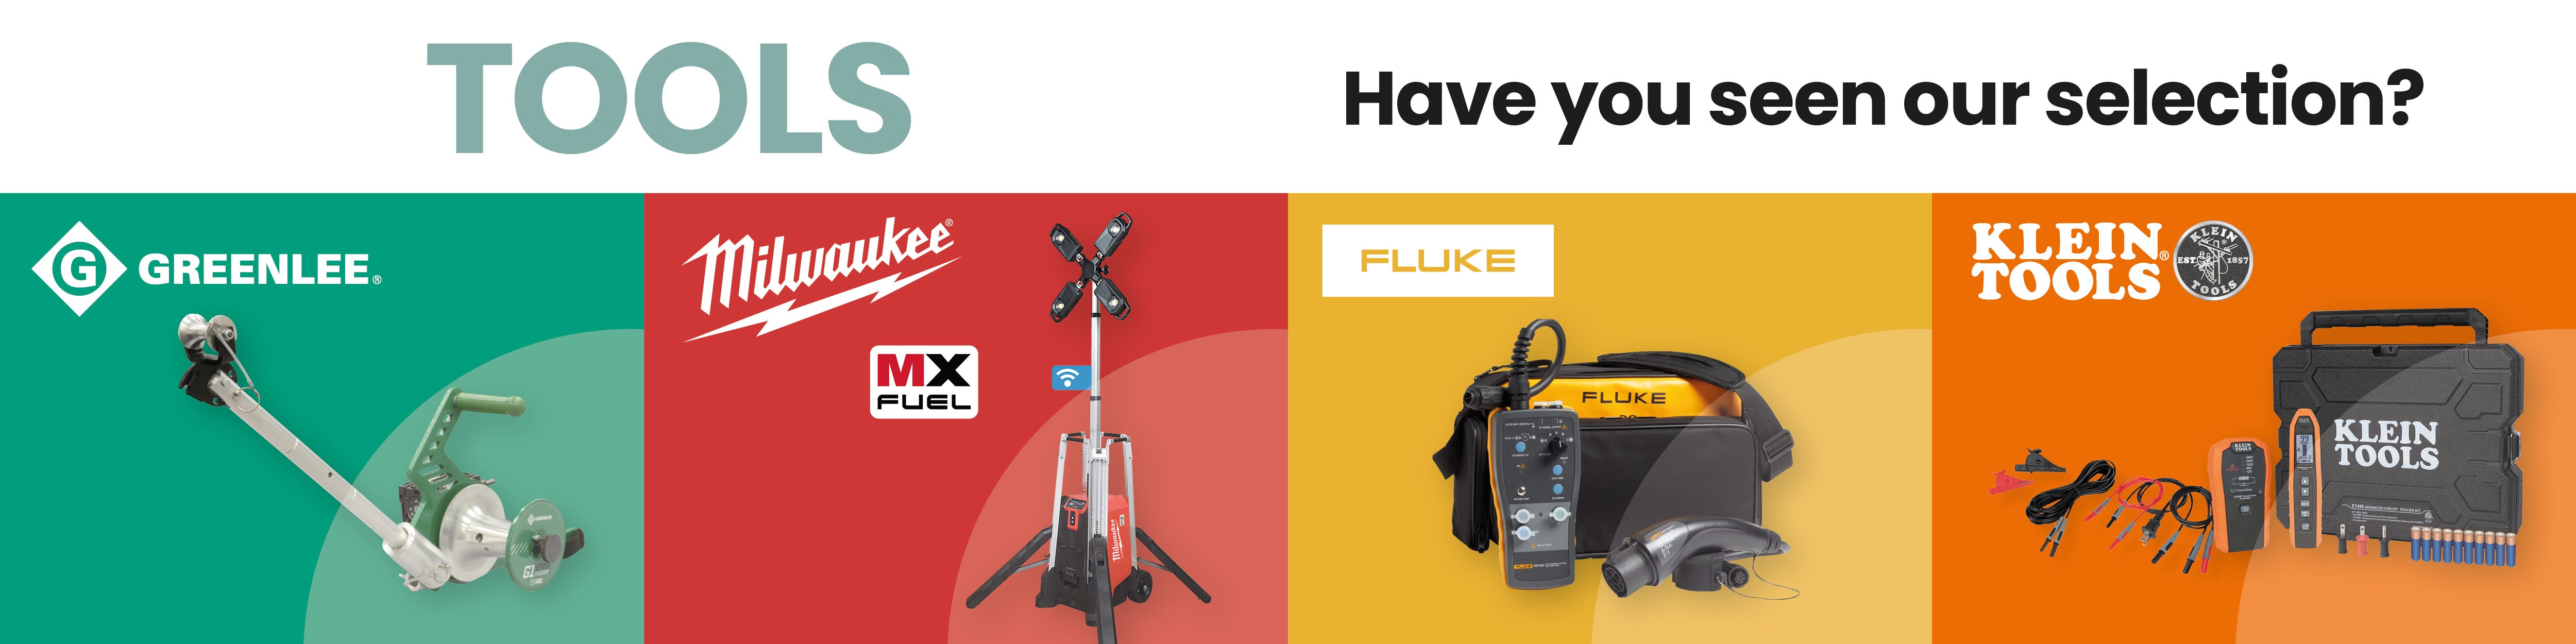 Tools : have you seen our selection?